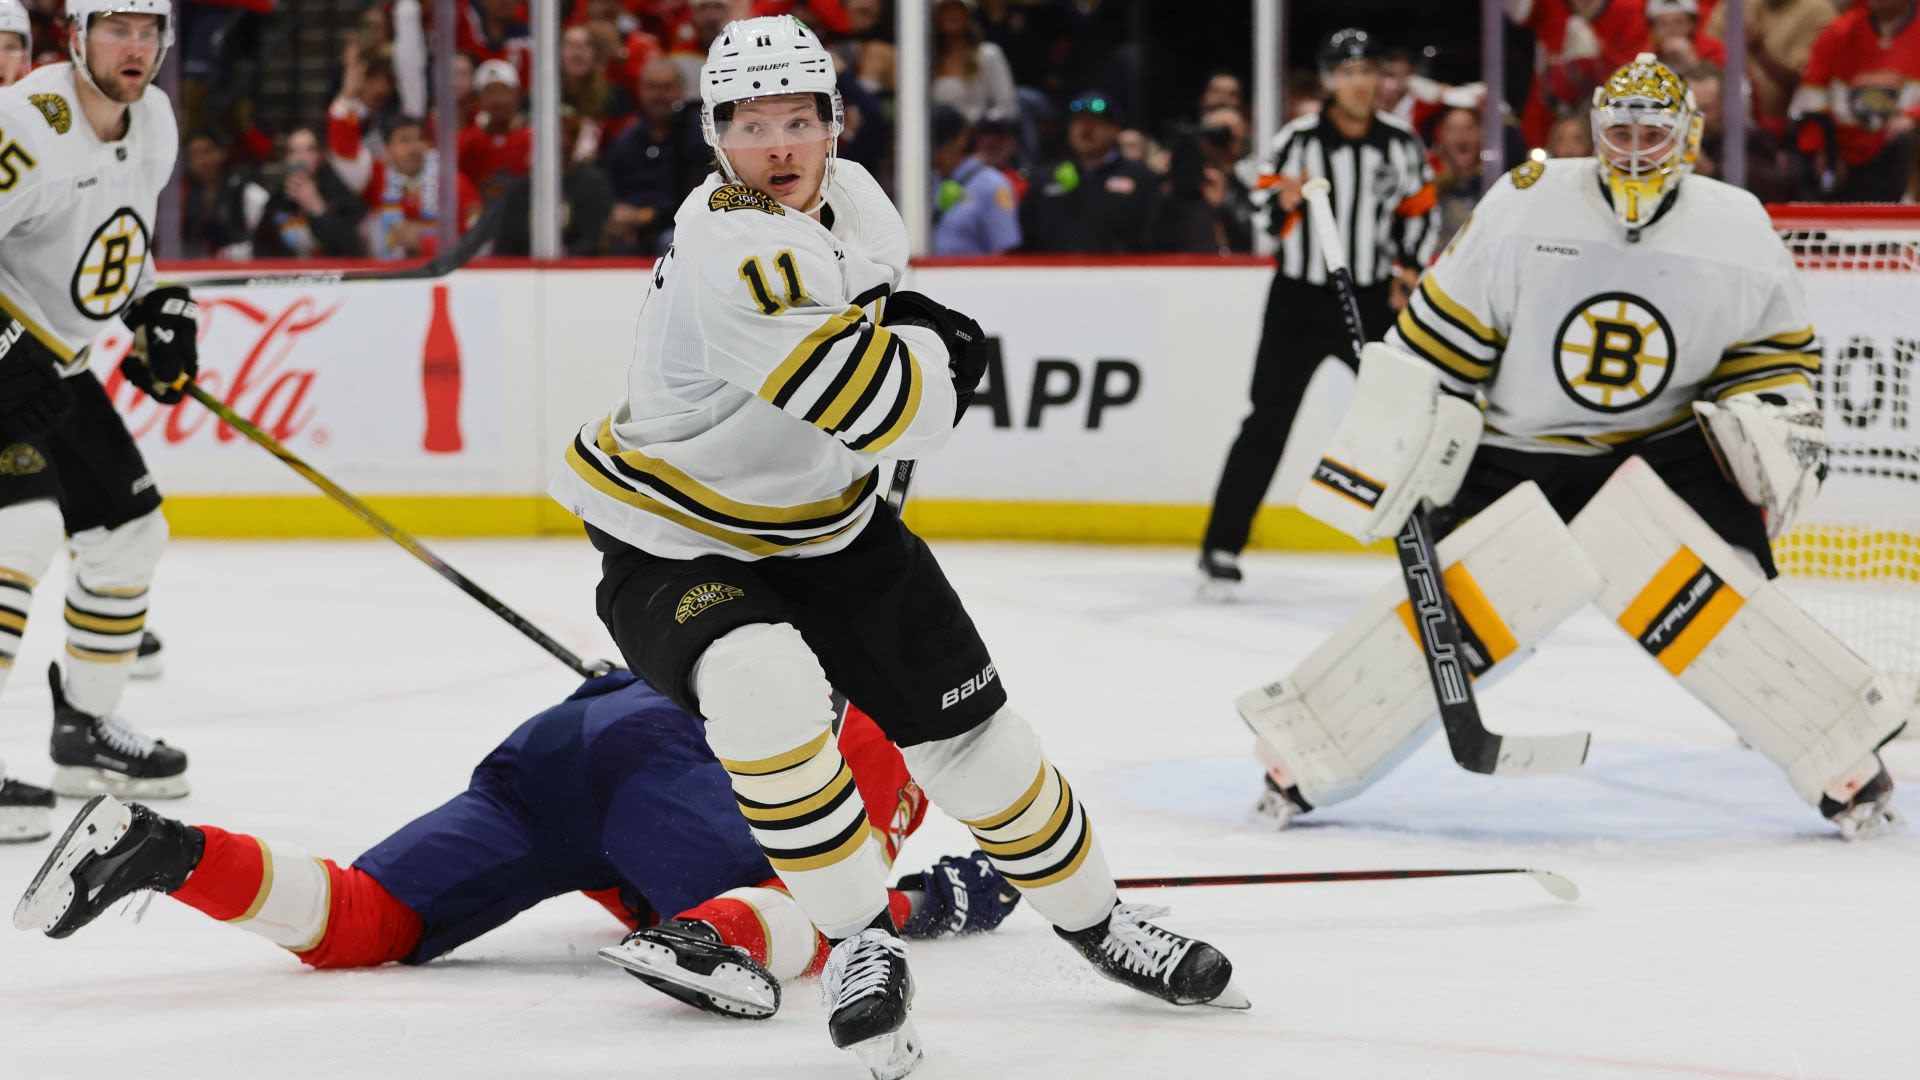 Trent Frederic Candidly Reveals Bruins' Reaction To Sam Bennett's Hit